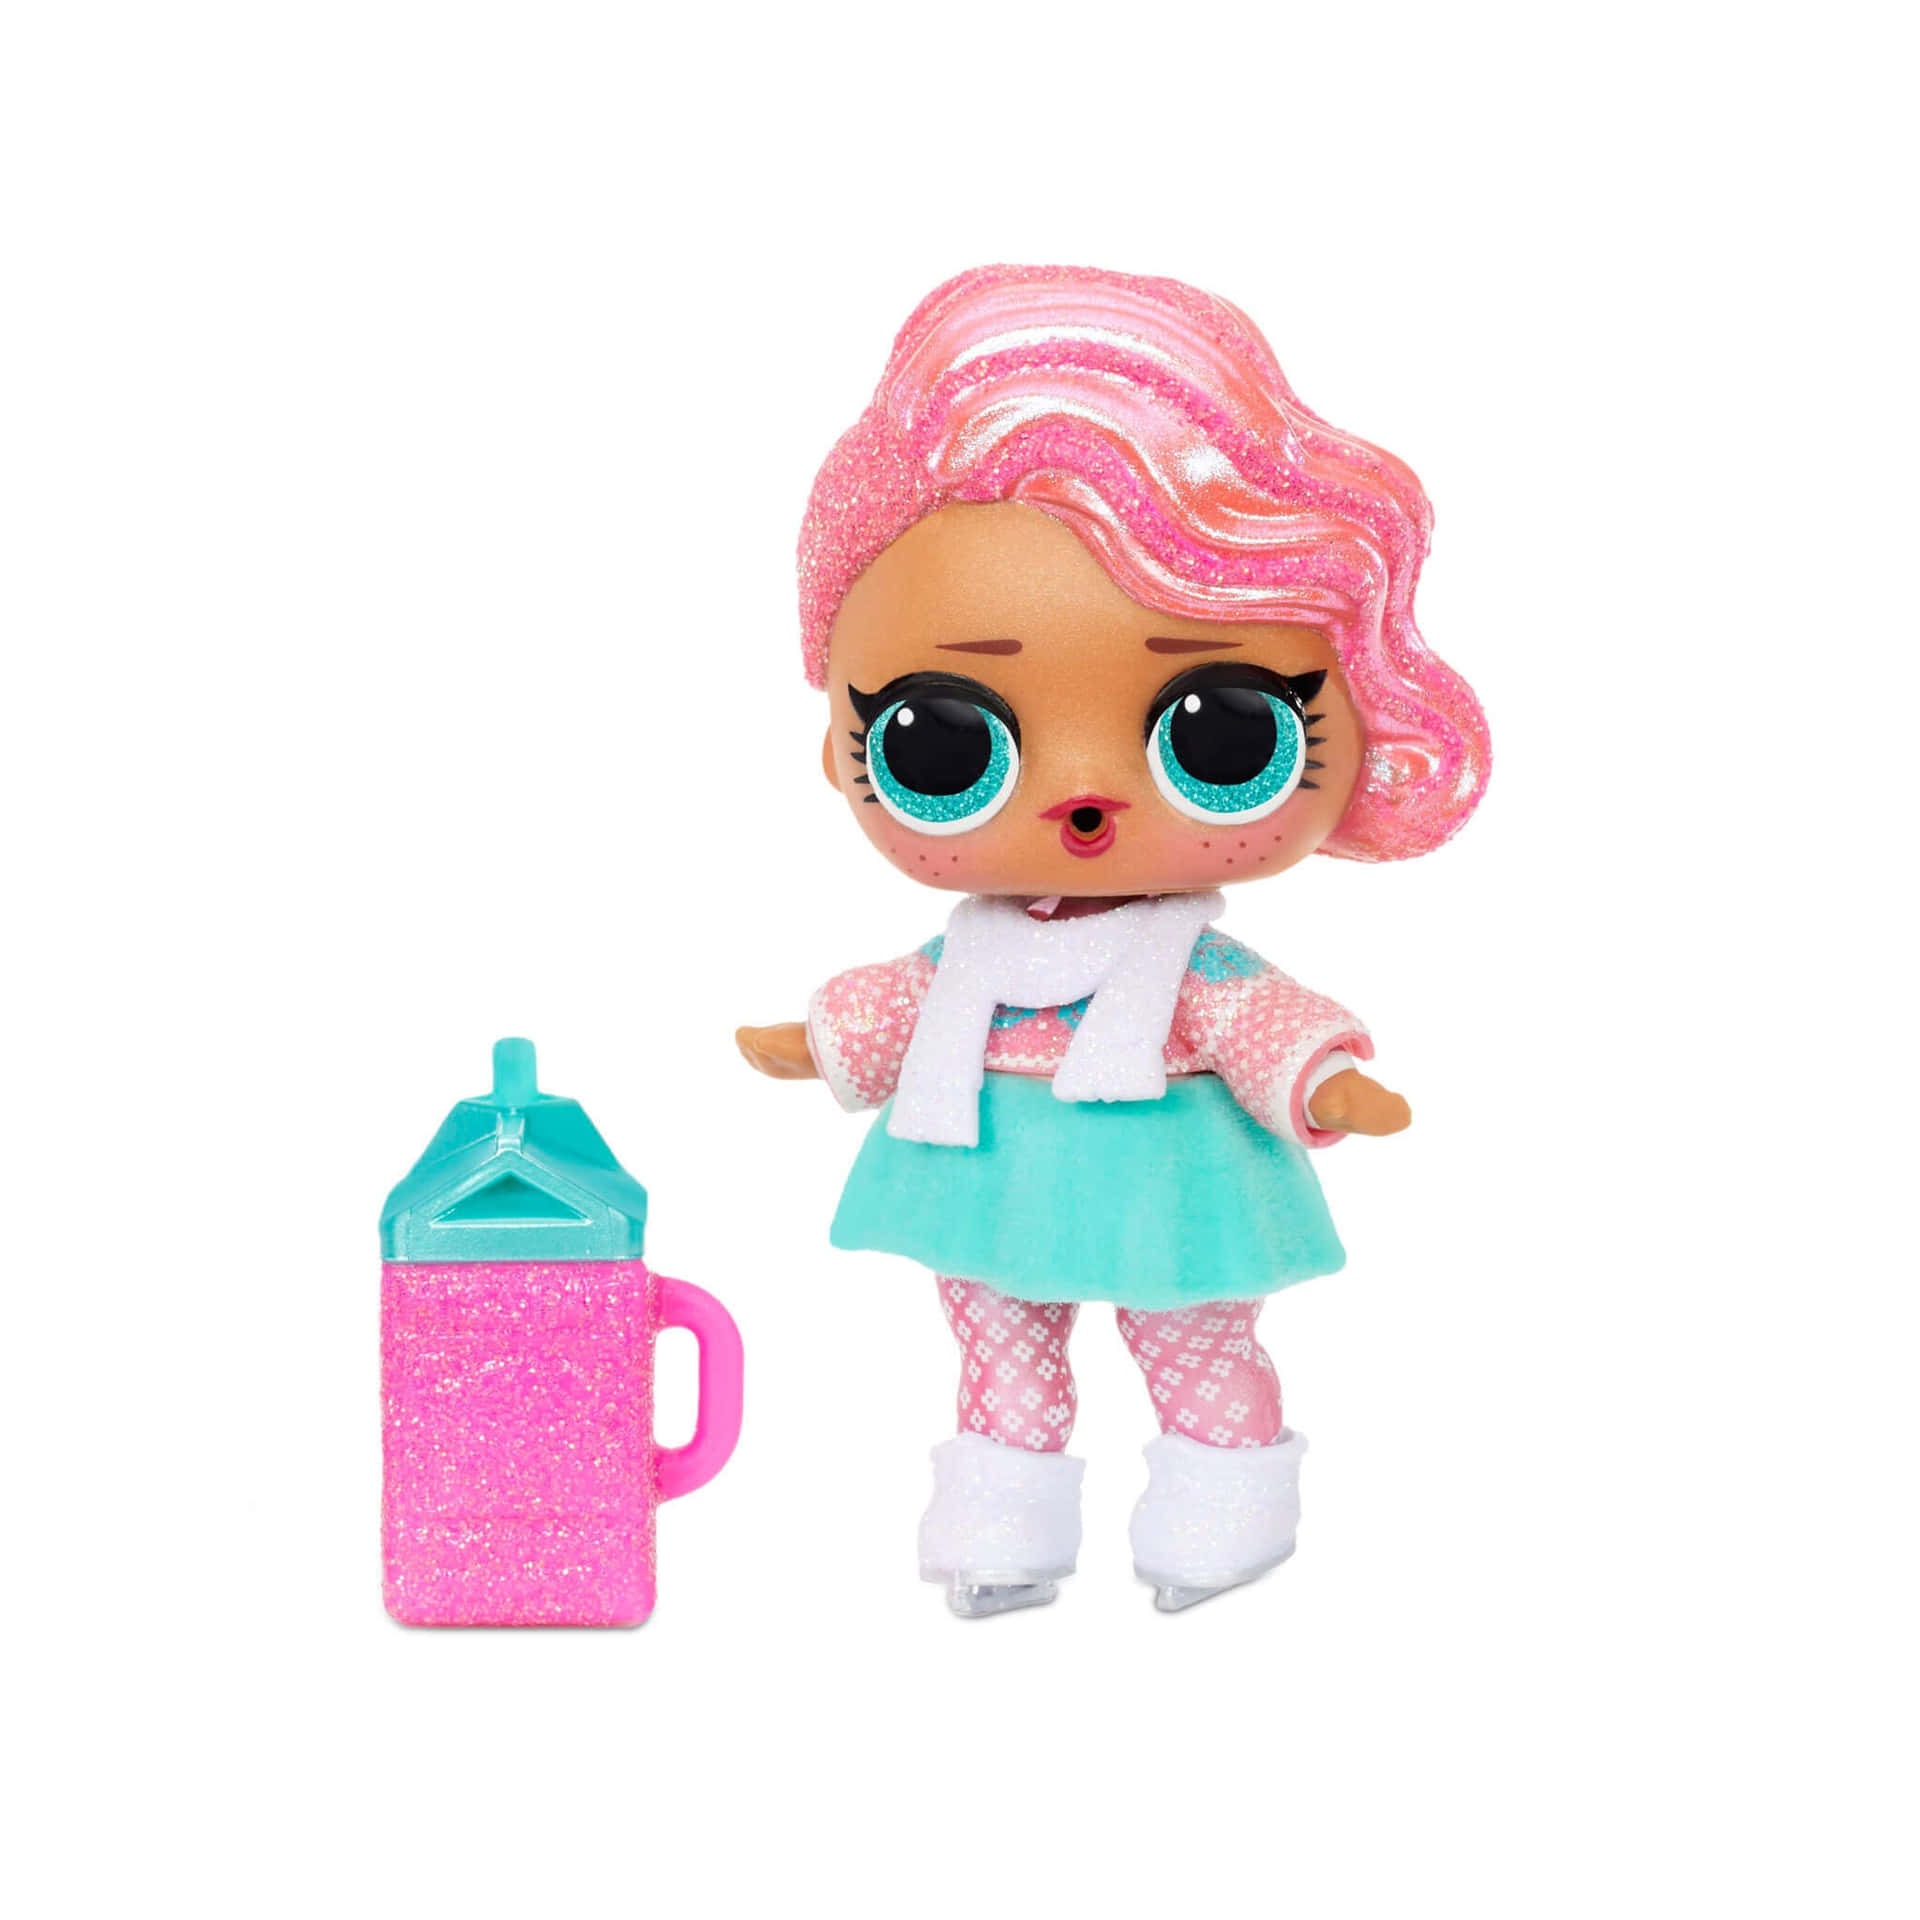 Lst Doll With Pink Hair And A Cup